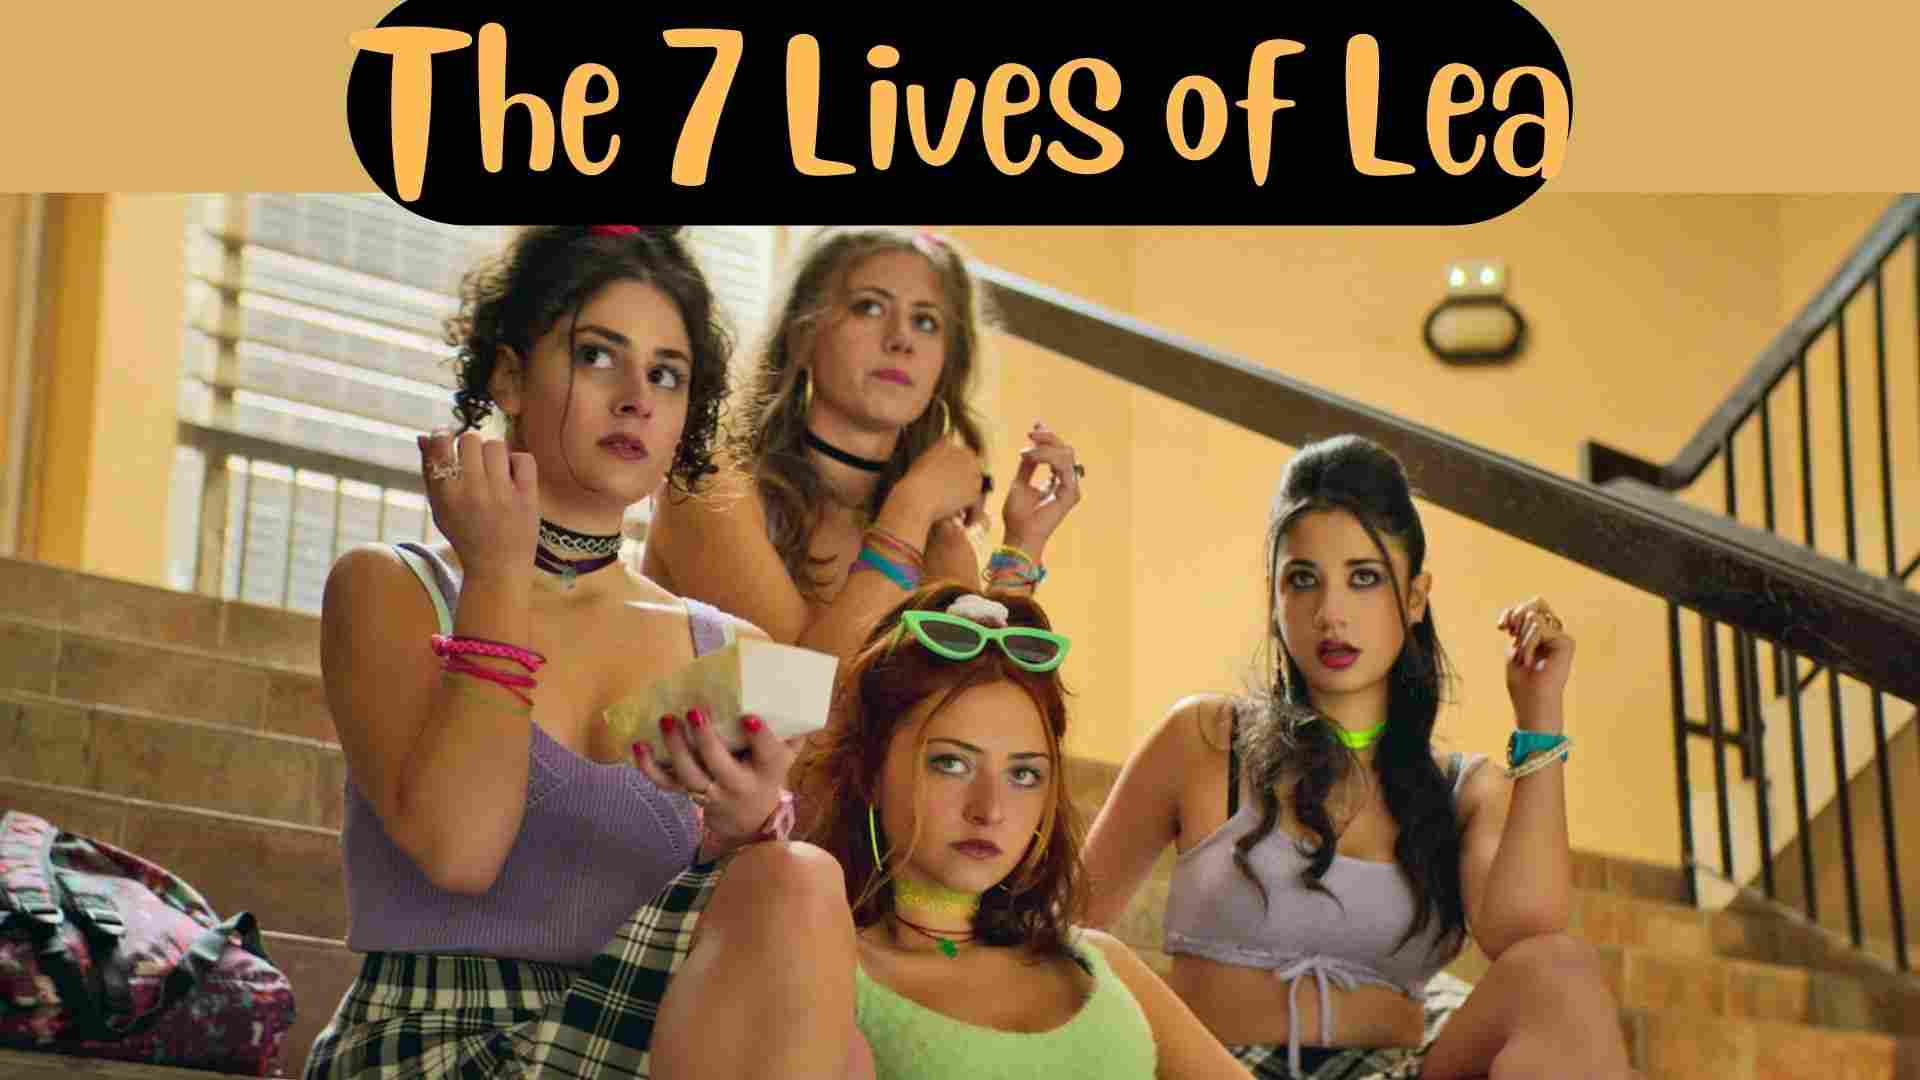 The 7 Lives of Lea Parents guide and Age Rating | 2022